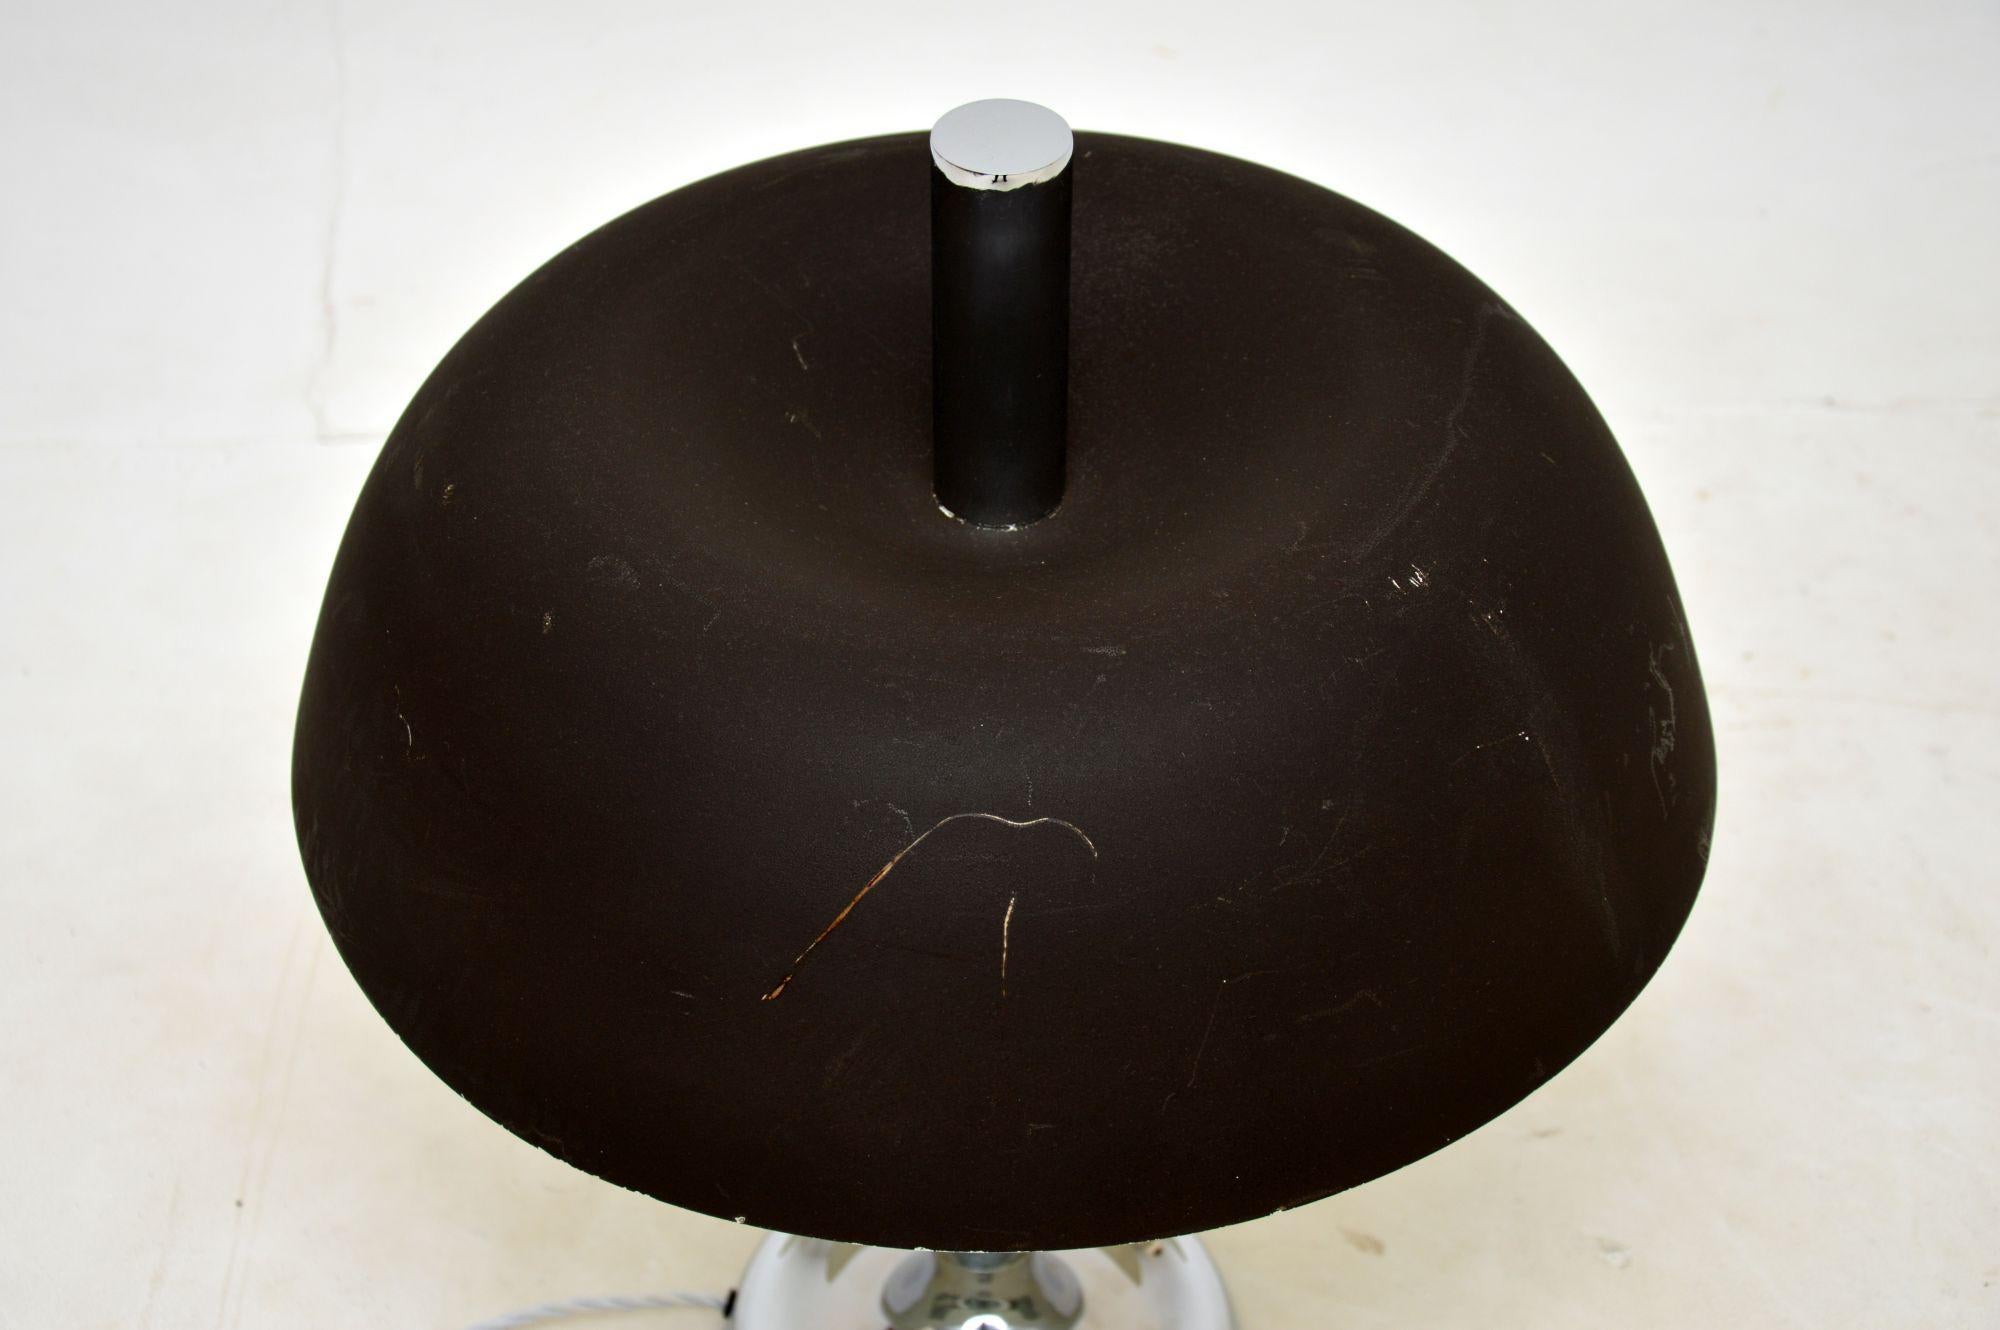 1970s Vintage Italian Chrome Mushroom Desk / Table Lamp In Good Condition For Sale In London, GB